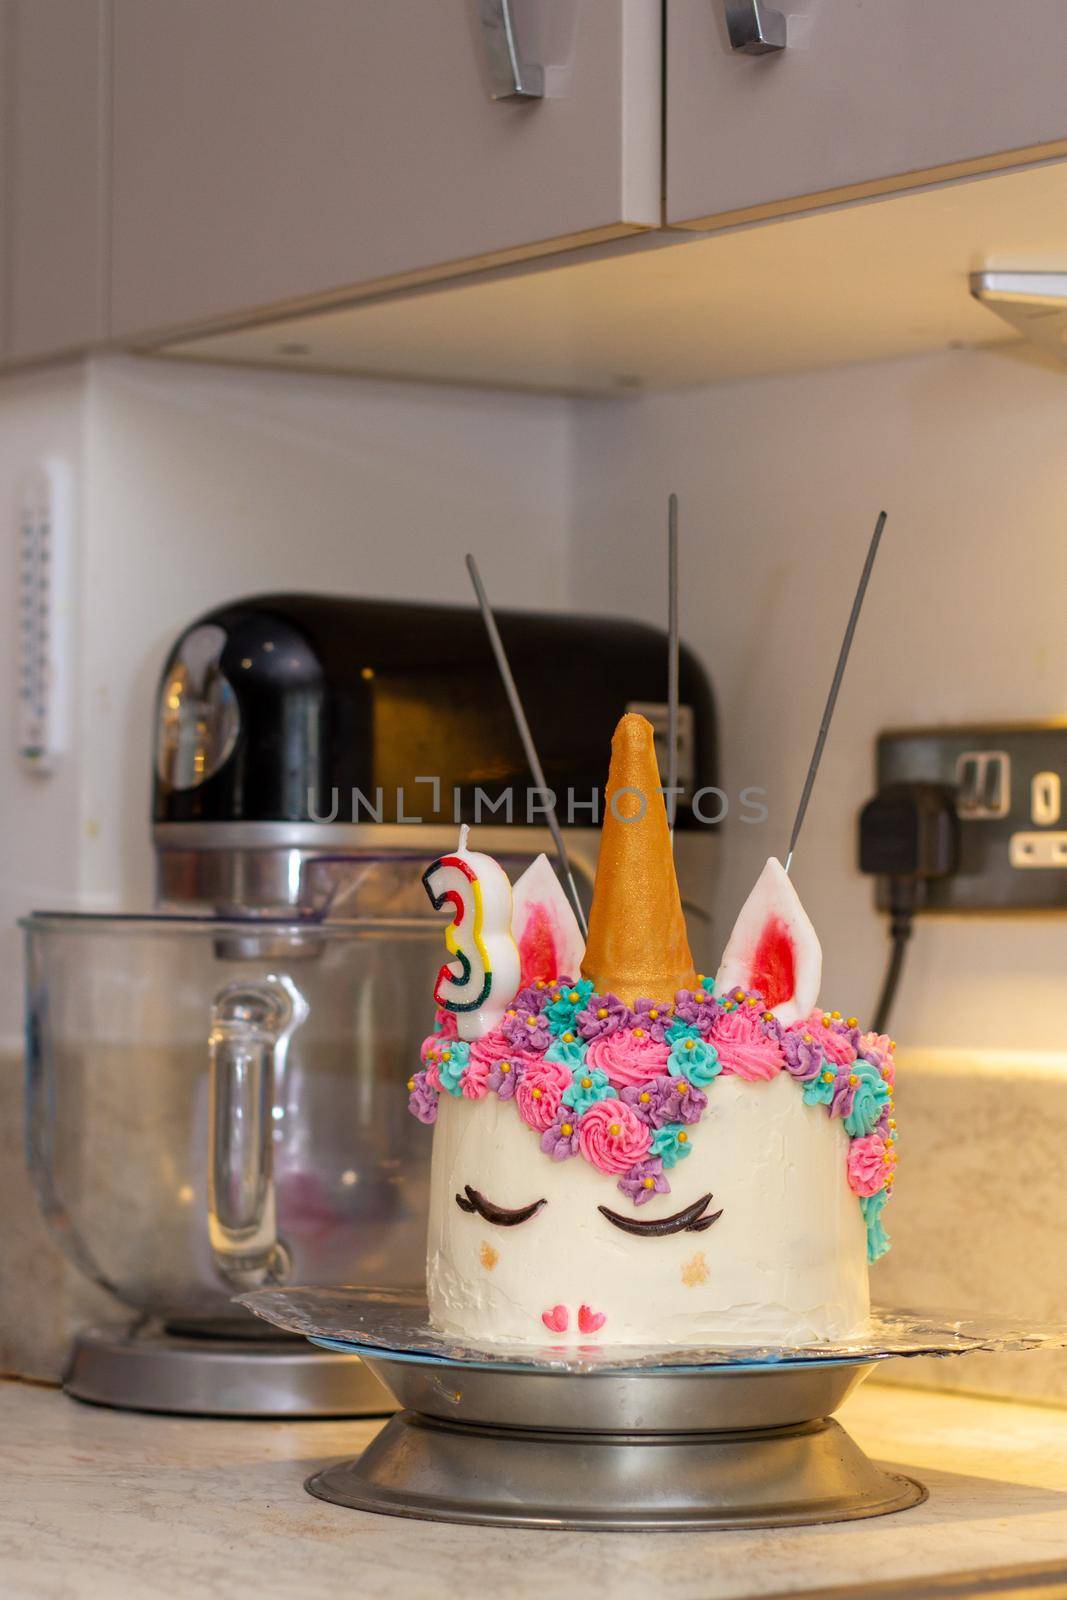 Close-up of a unicorn decorated birthday cake on a kitchen counter